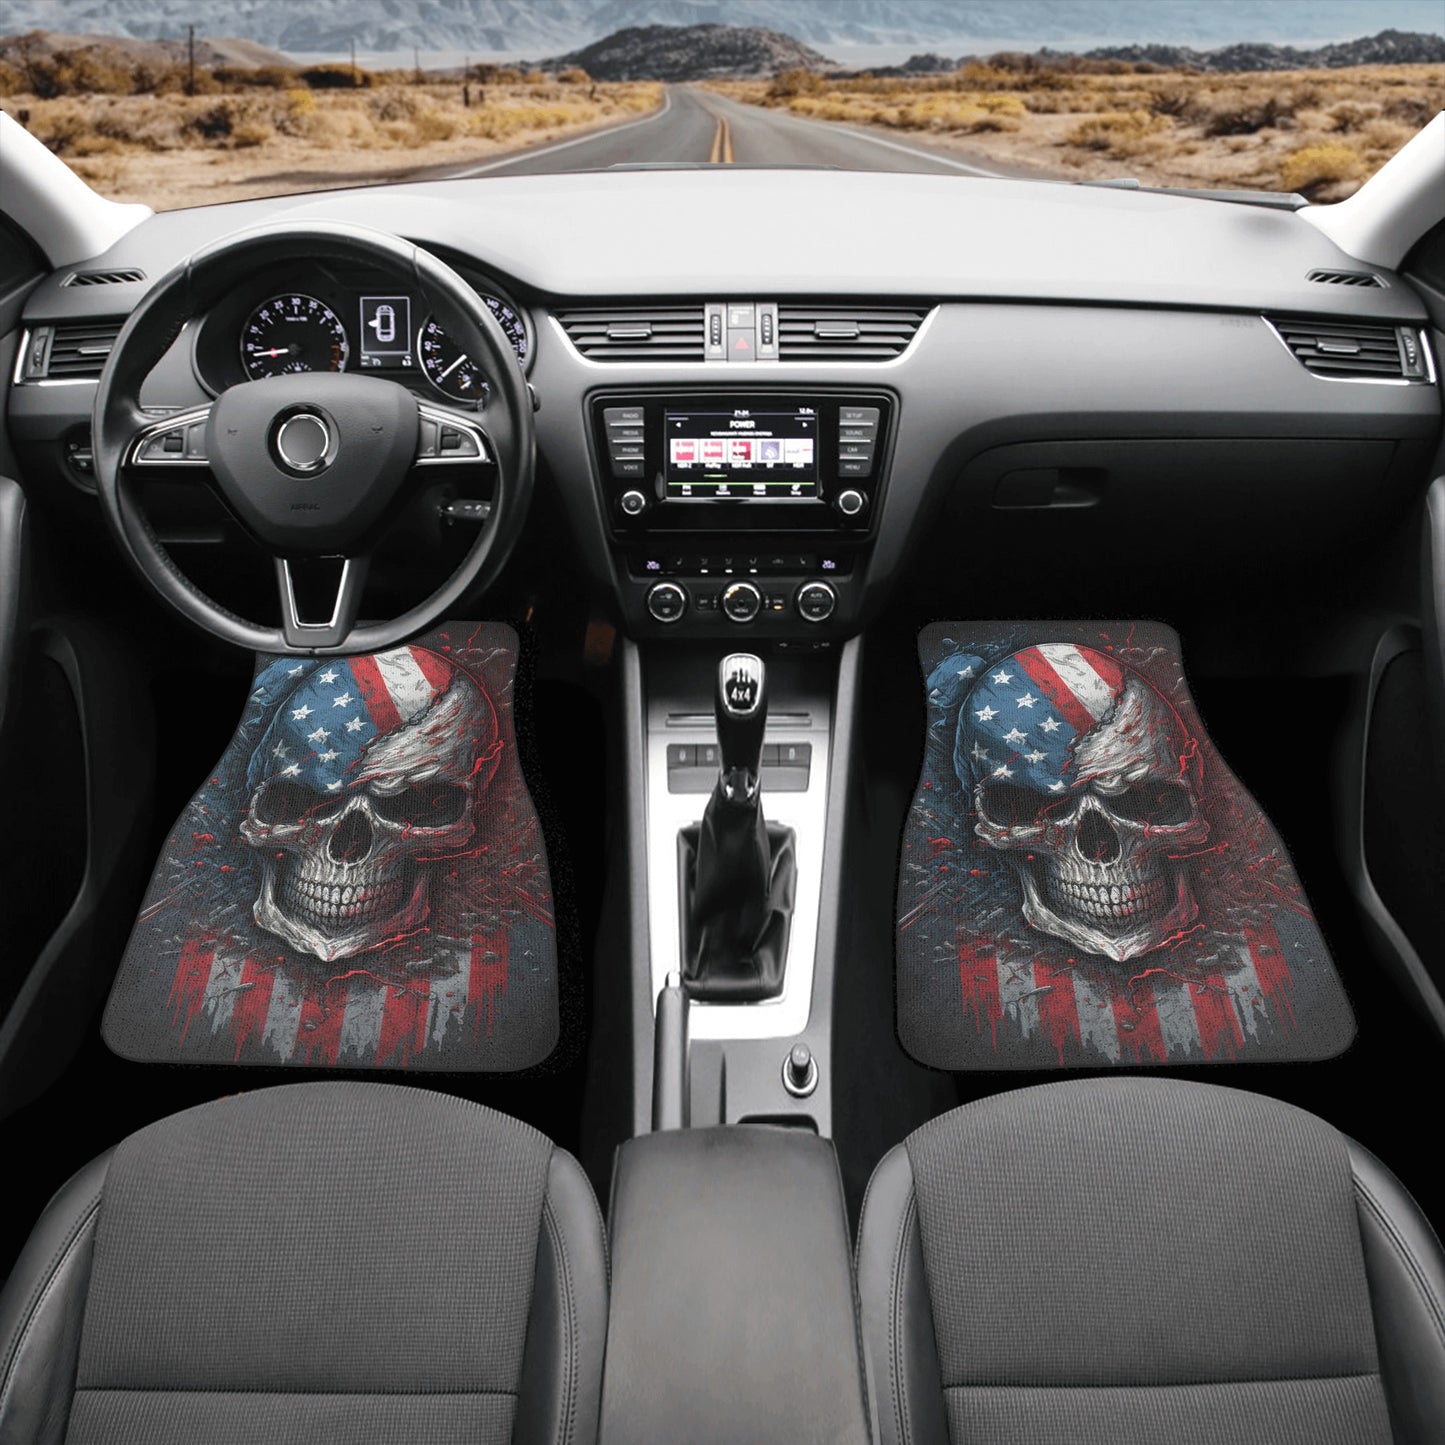 Motorcycle skull car accessories, biker skull car accessories, goth slip-on seat covers, horror car seat protector cover, death skull car fl Back and Front Car Floor Mats